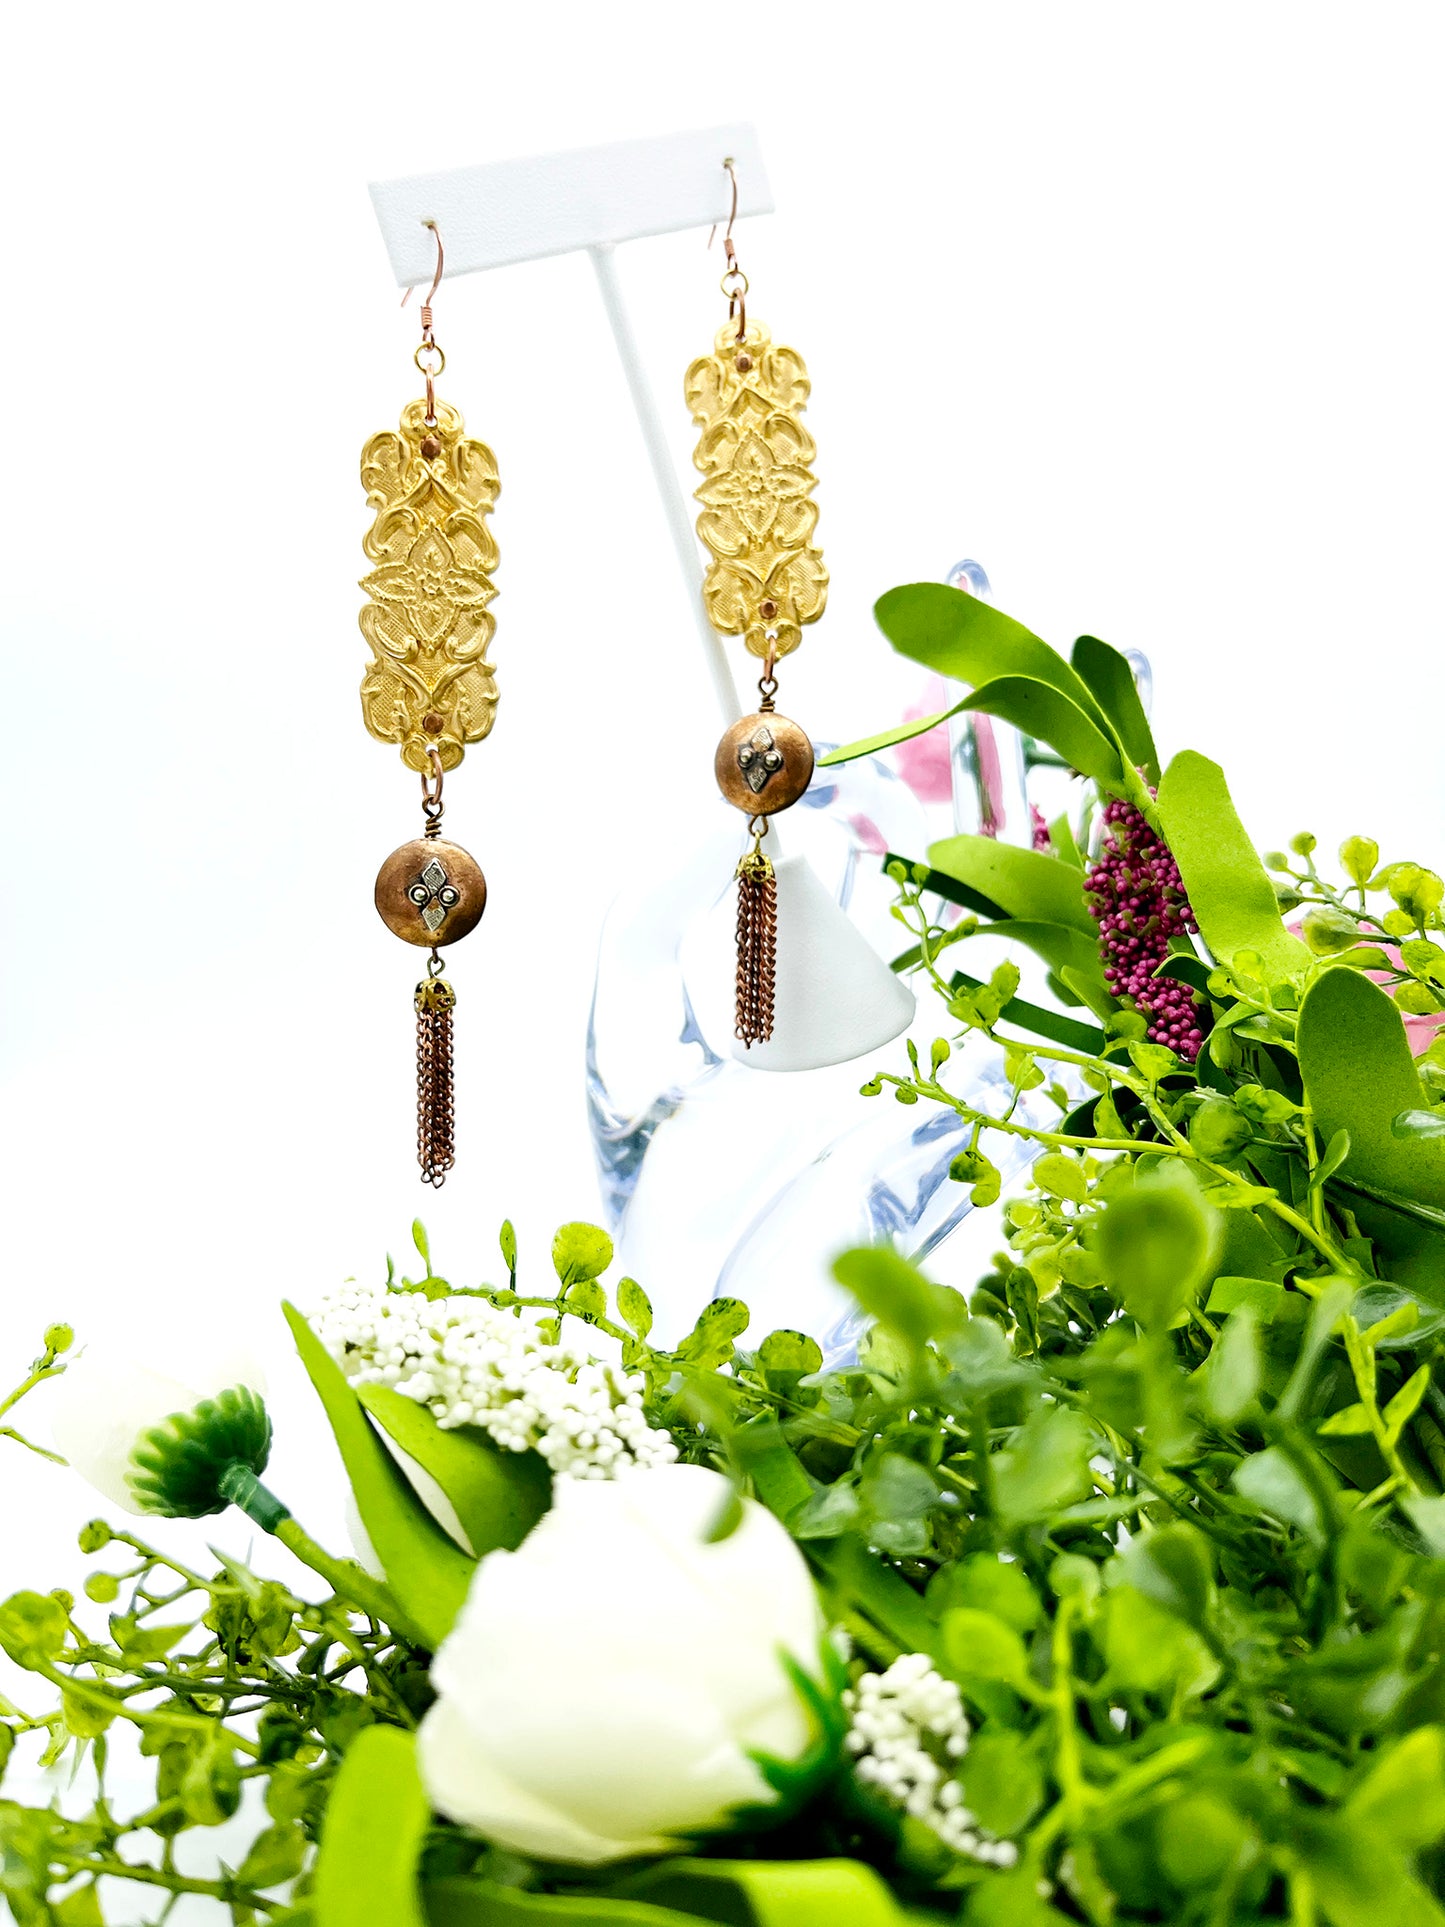 Floral earrings with copper beads and tassels